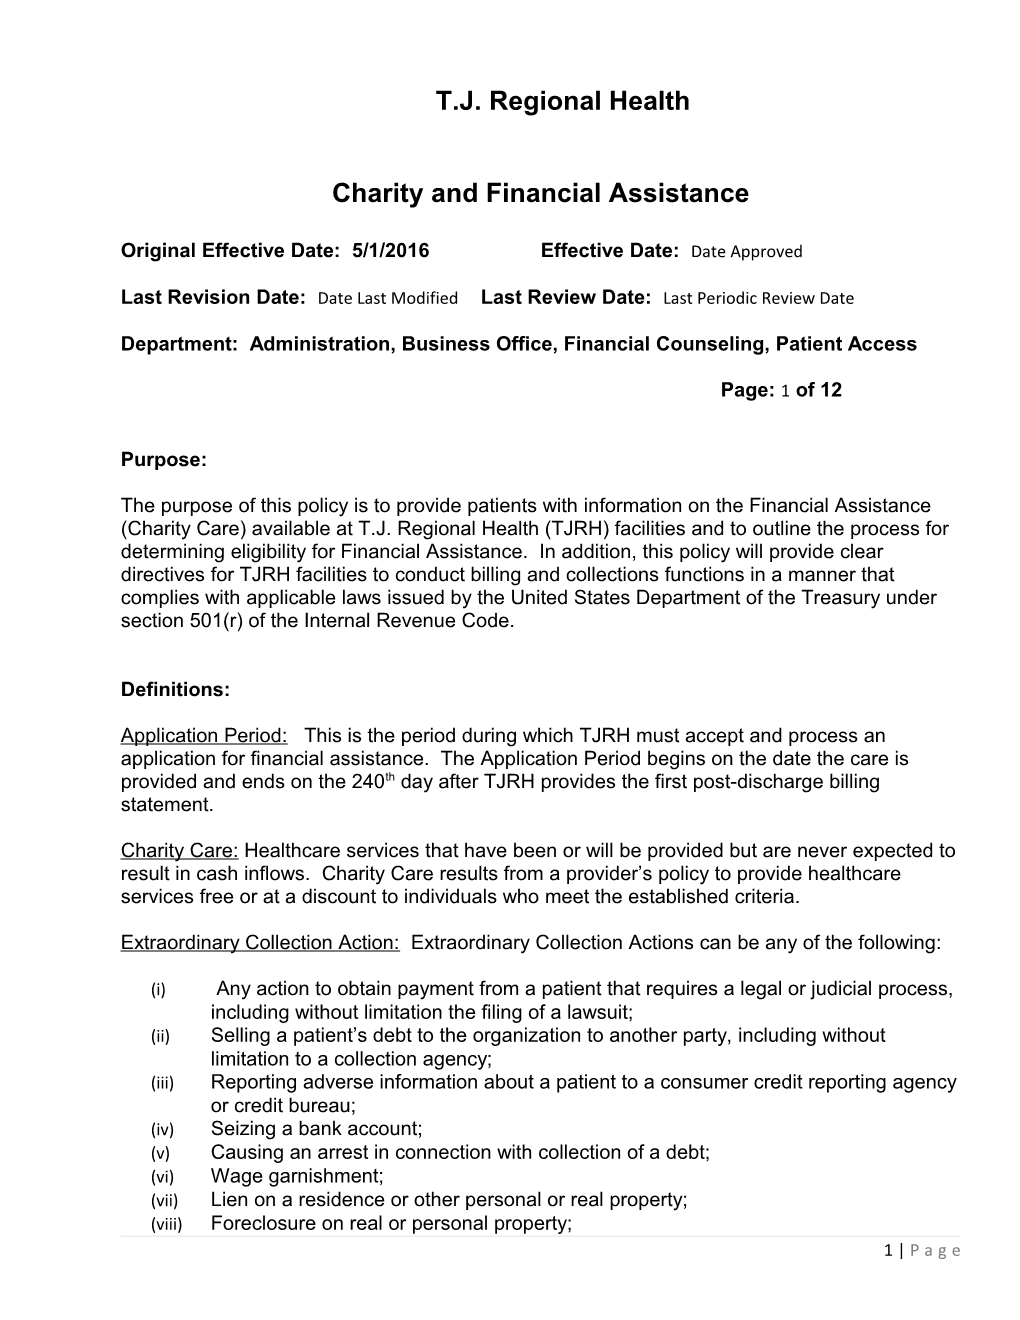 Charity and Financial Assistance